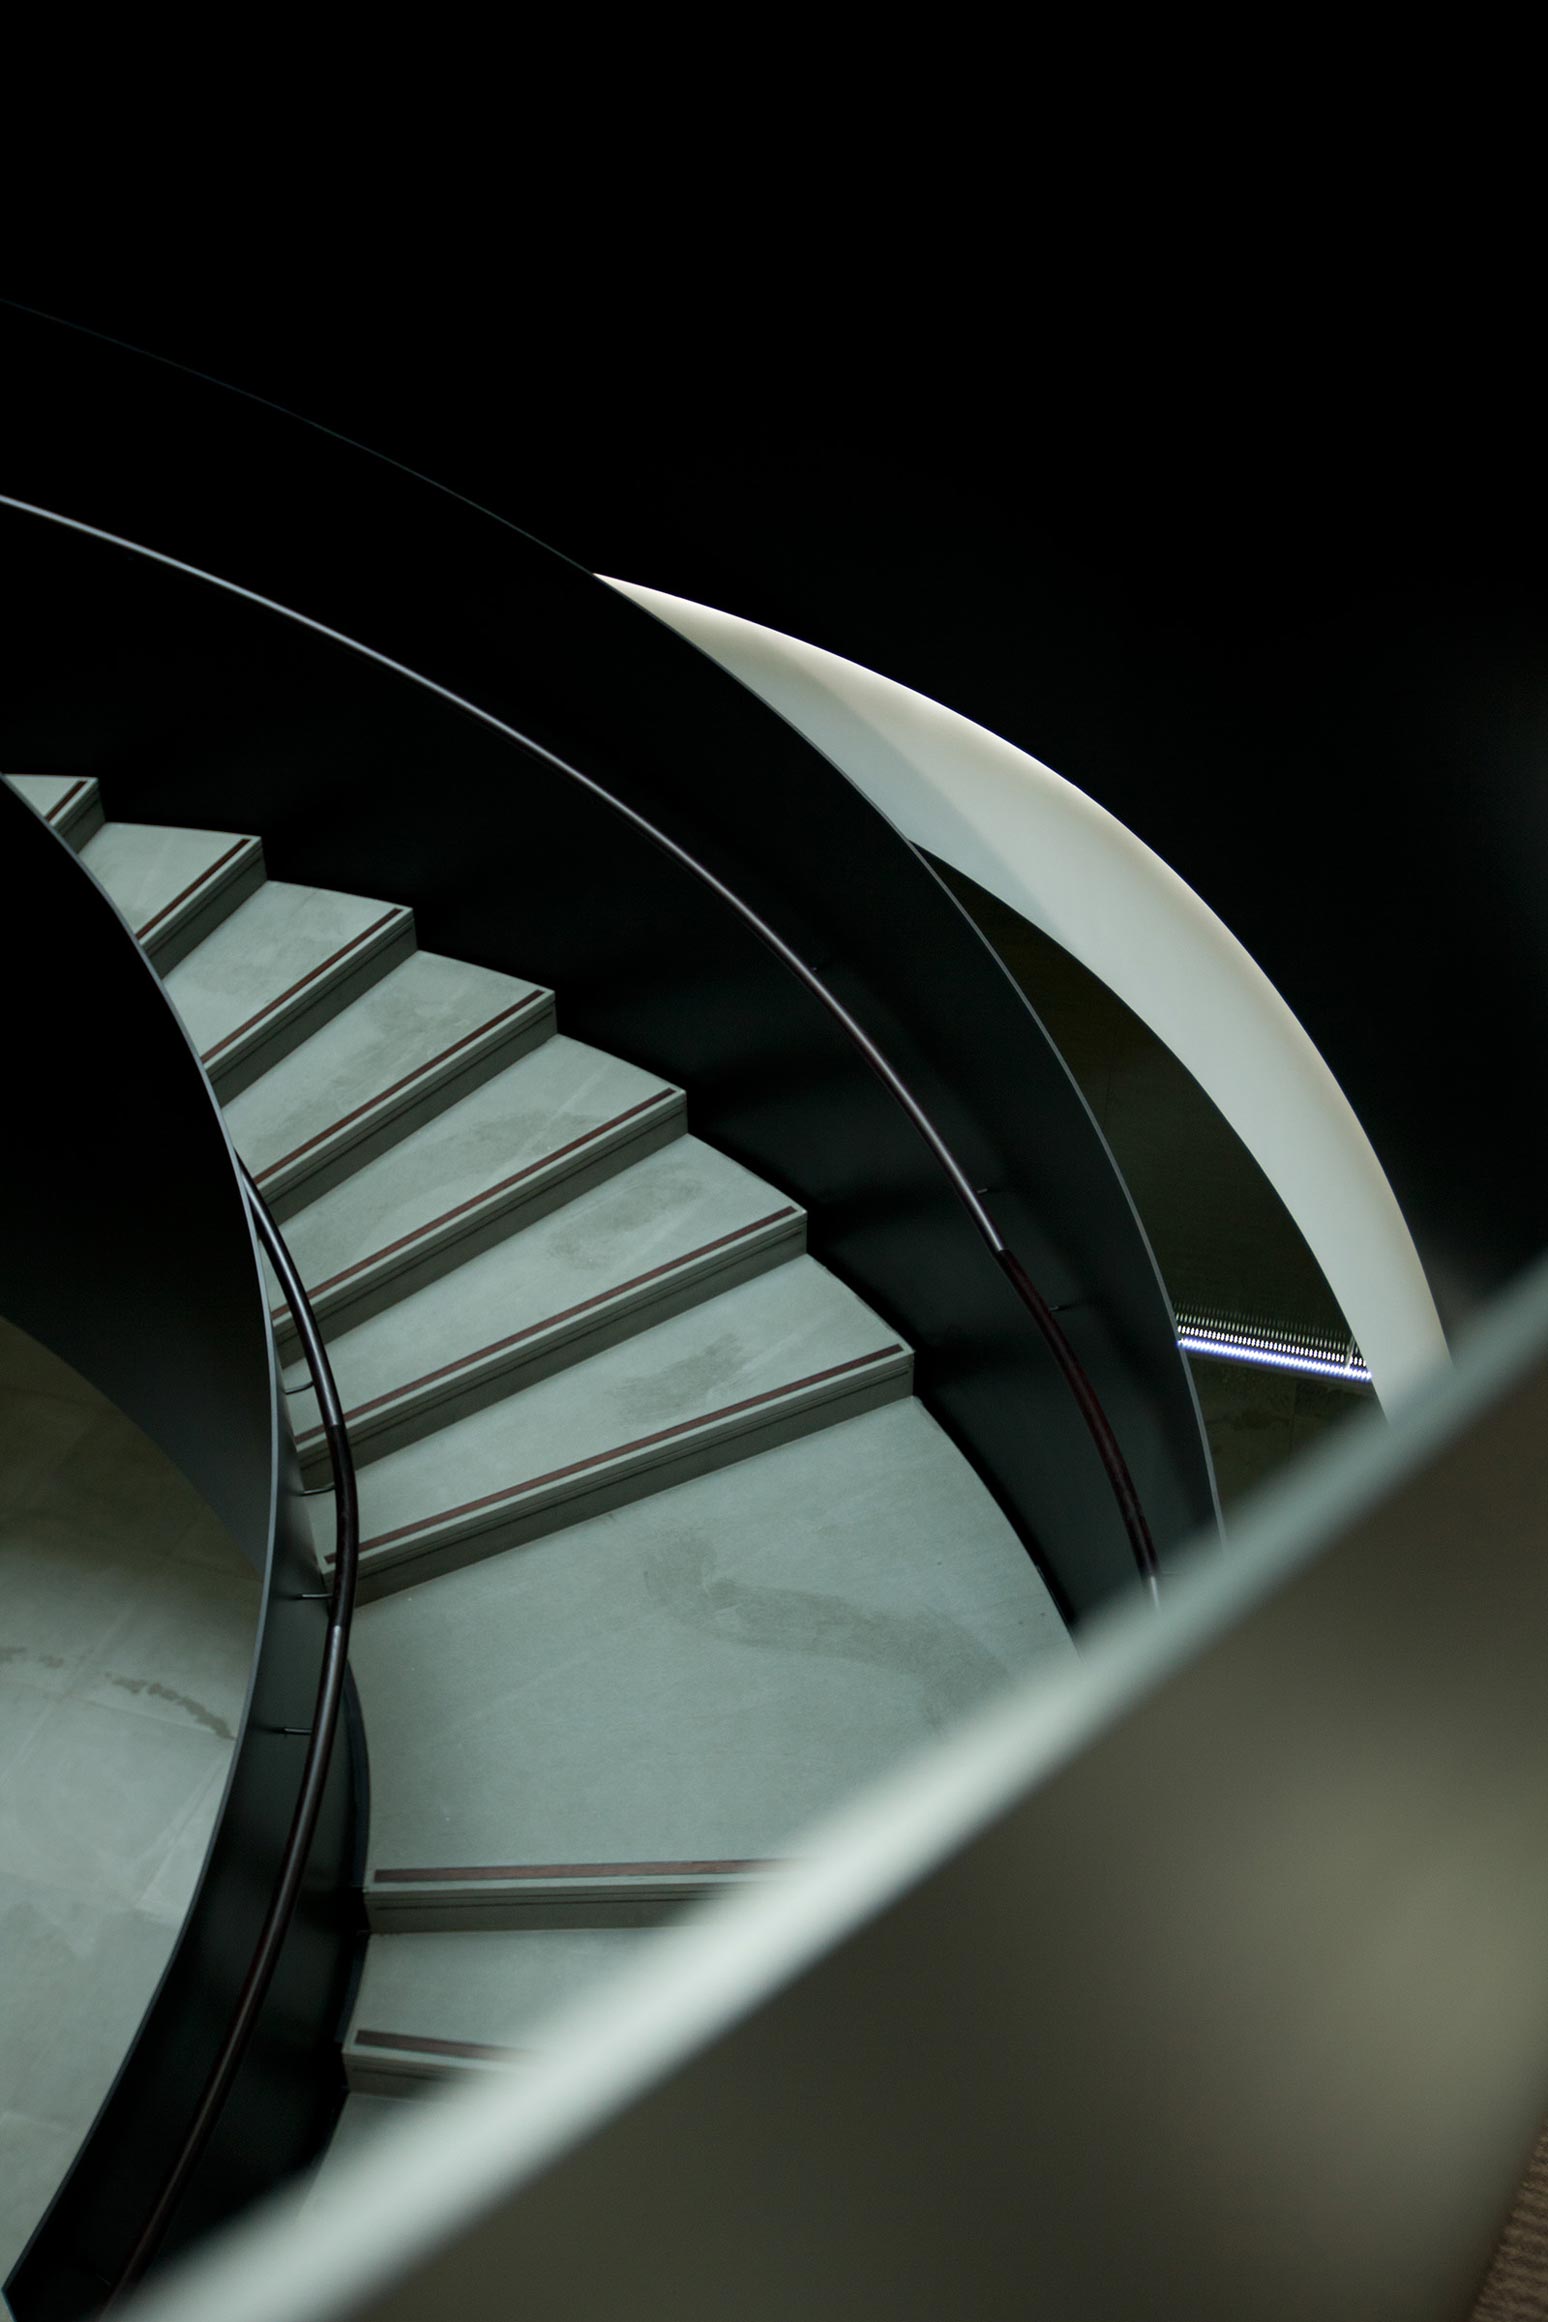 Staircase image